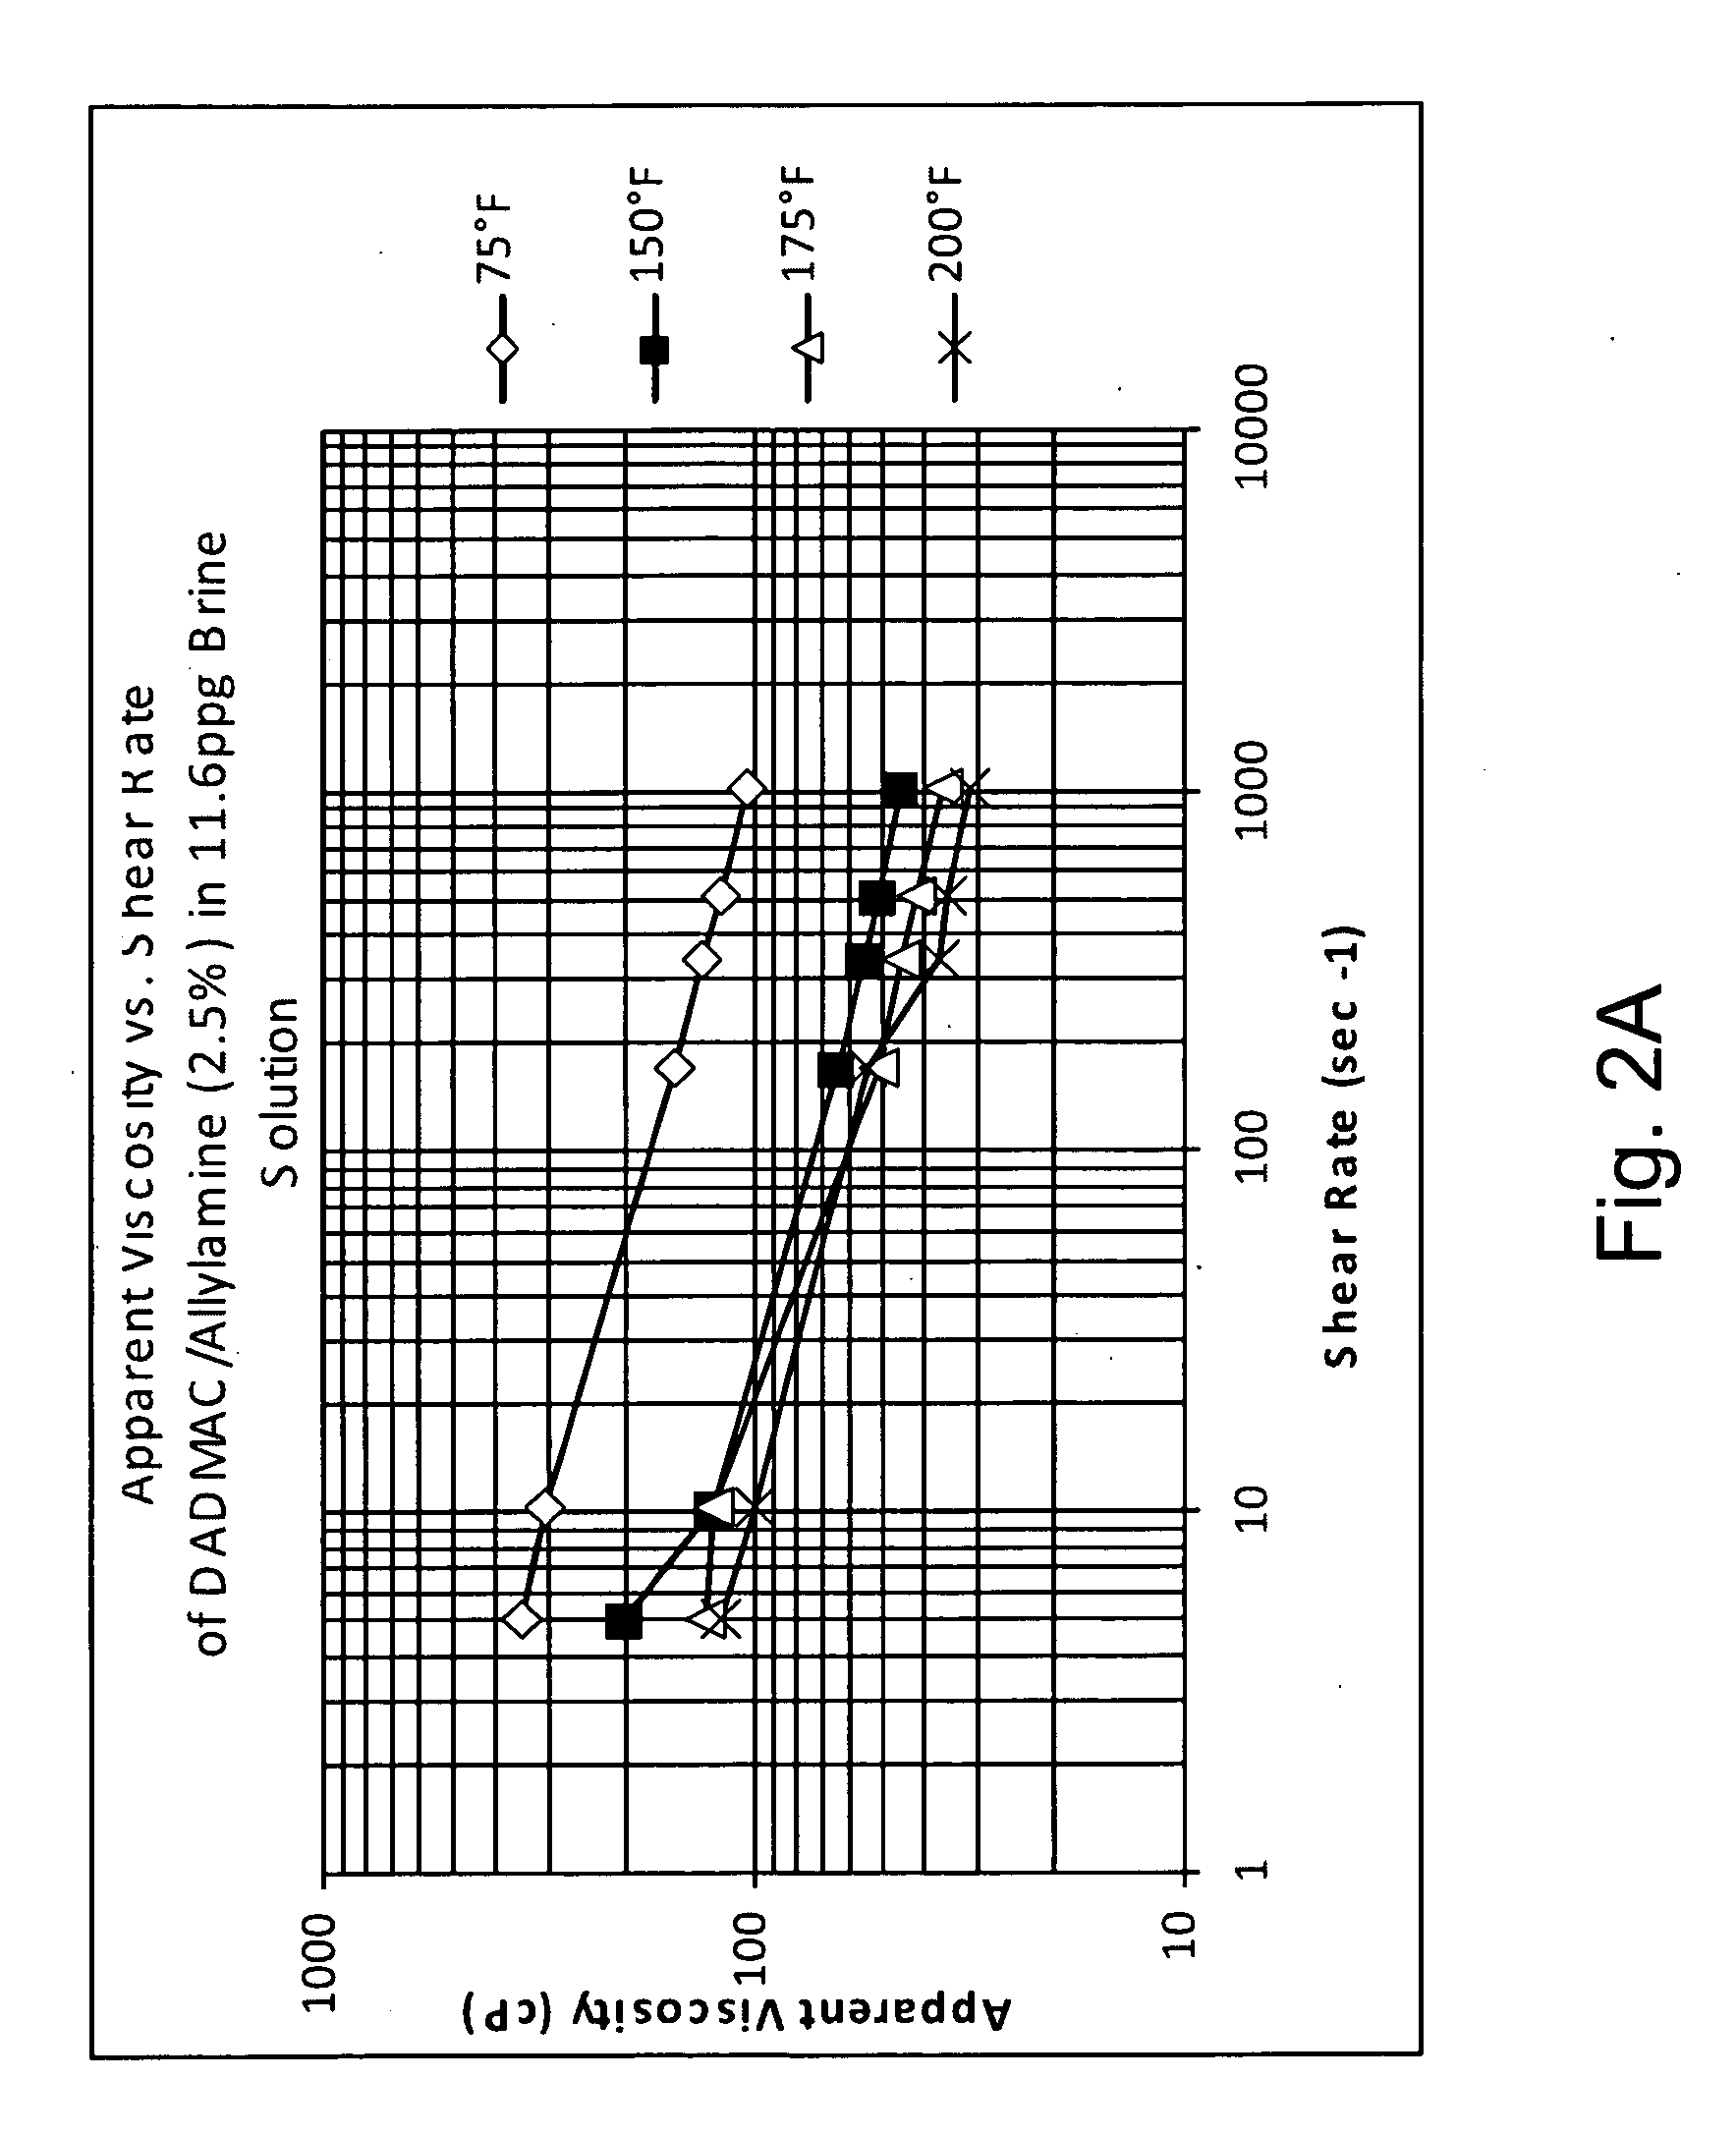 Rheology modifying agents and methods of modifying fluid rheology use in hydrocarbon recovery